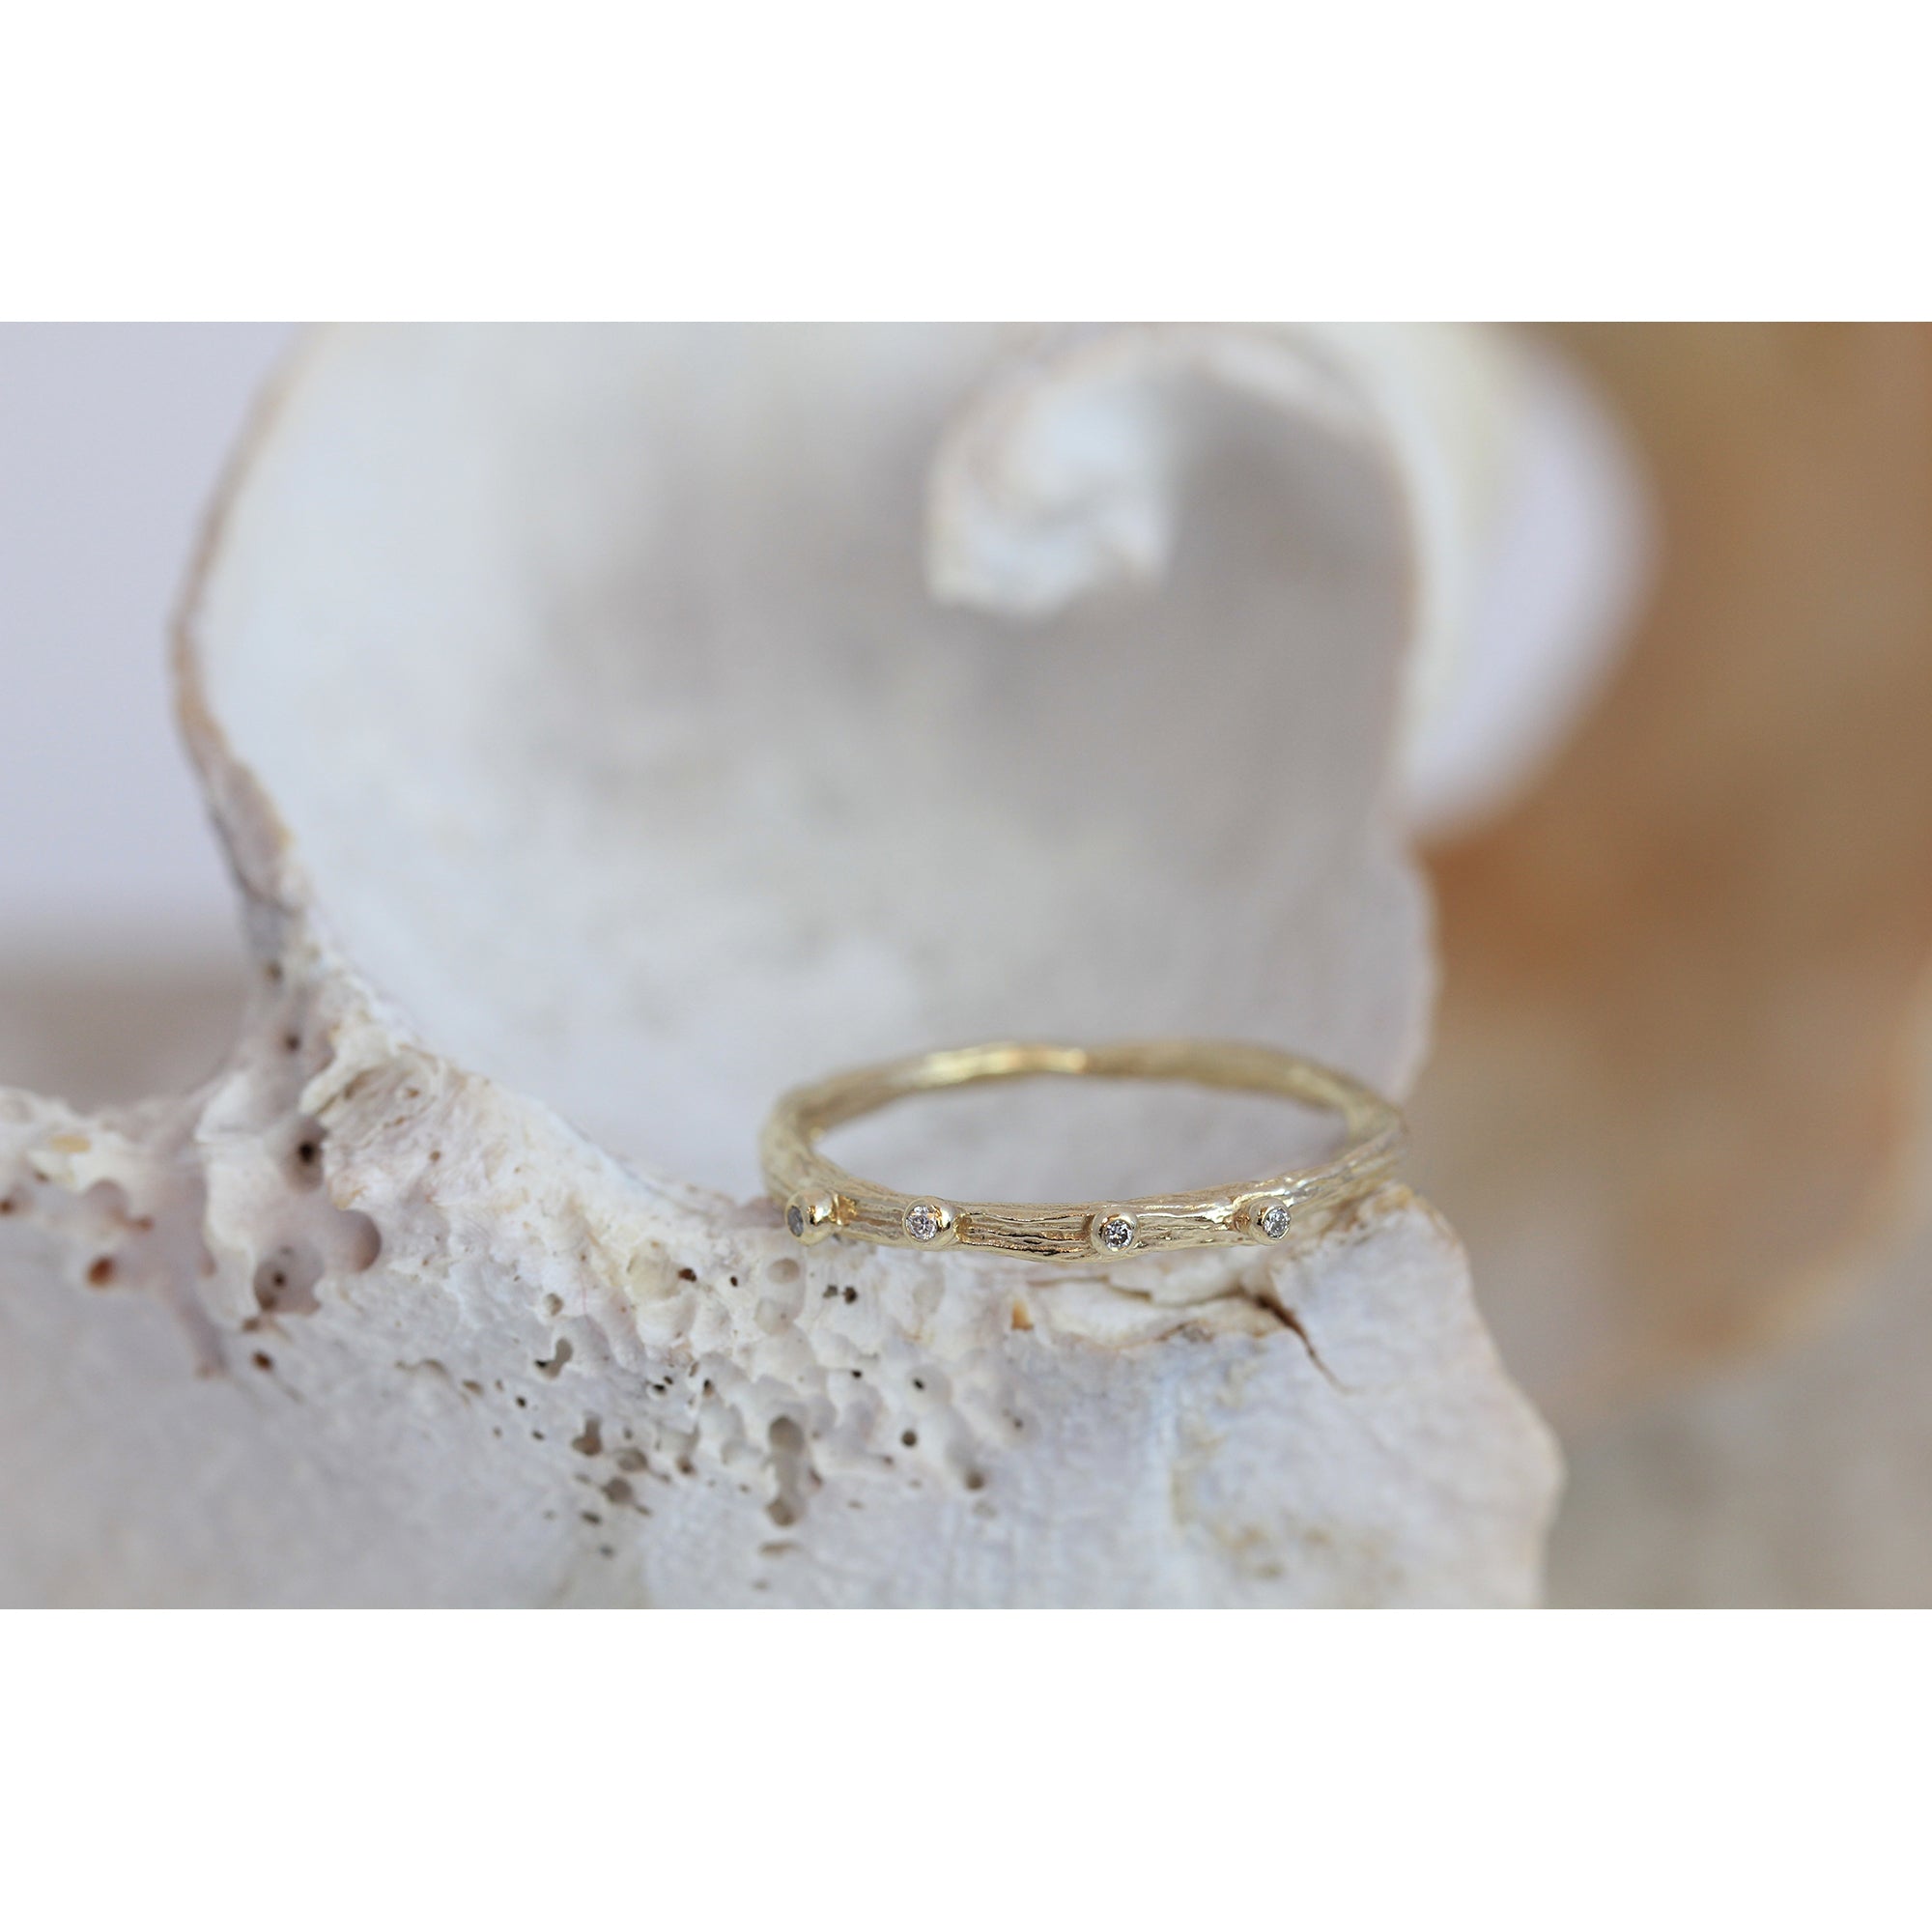 Dainty gold ring cast from a twig with tiny diamonds on the top. Handmade in Bristol by Irish jeweller Eily o connell. In this picture it is sitting on a shell.